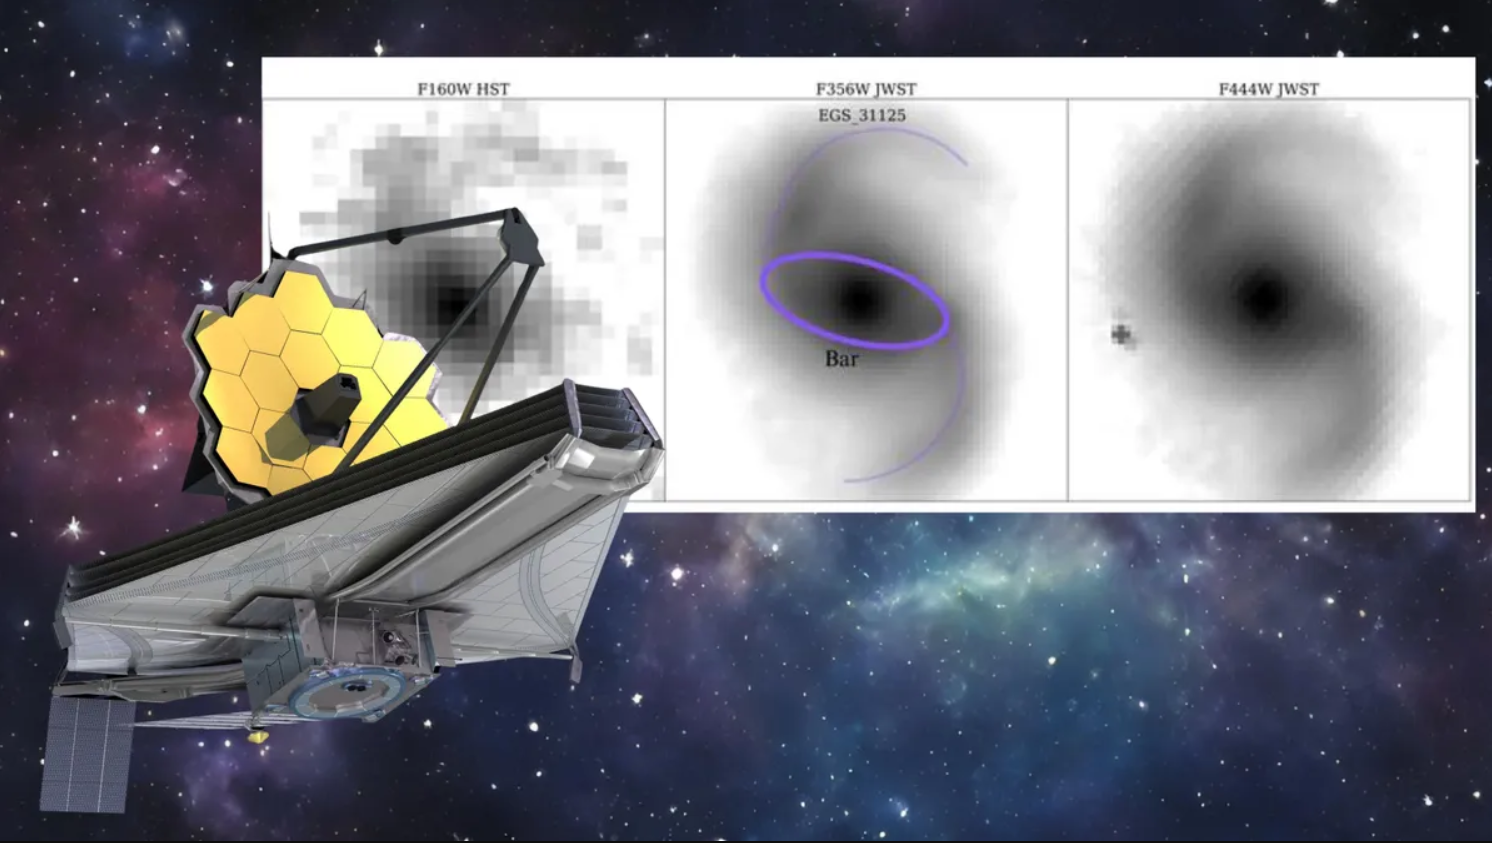 The JWST has detected galaxies in the early universe that experienced remarkably rapid growth.